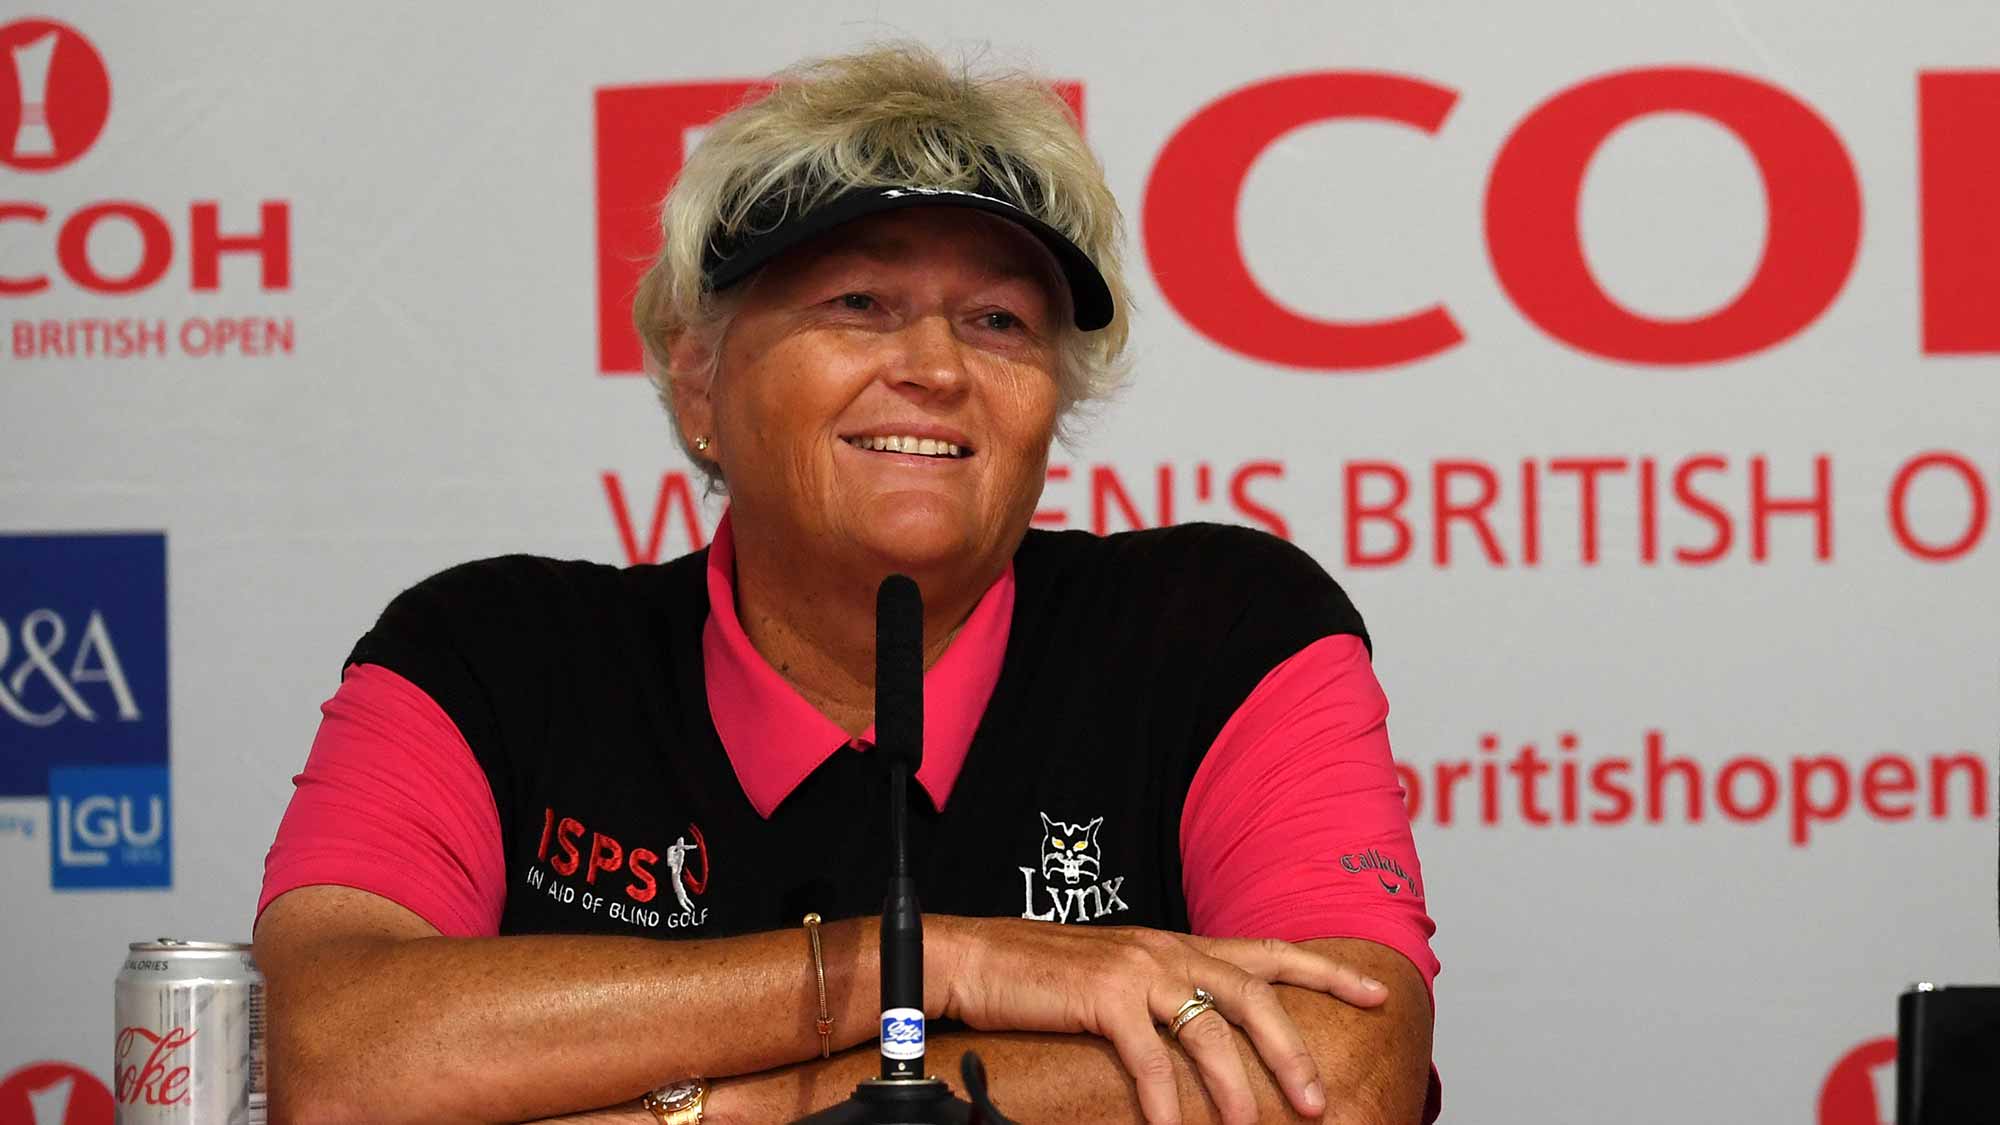 Laura Davies of England speaks to the media during a press conference ahead of the Ricoh Women's British Open at Royal Lytham & St. Annes on August 1, 2018 in Lytham St Annes, England